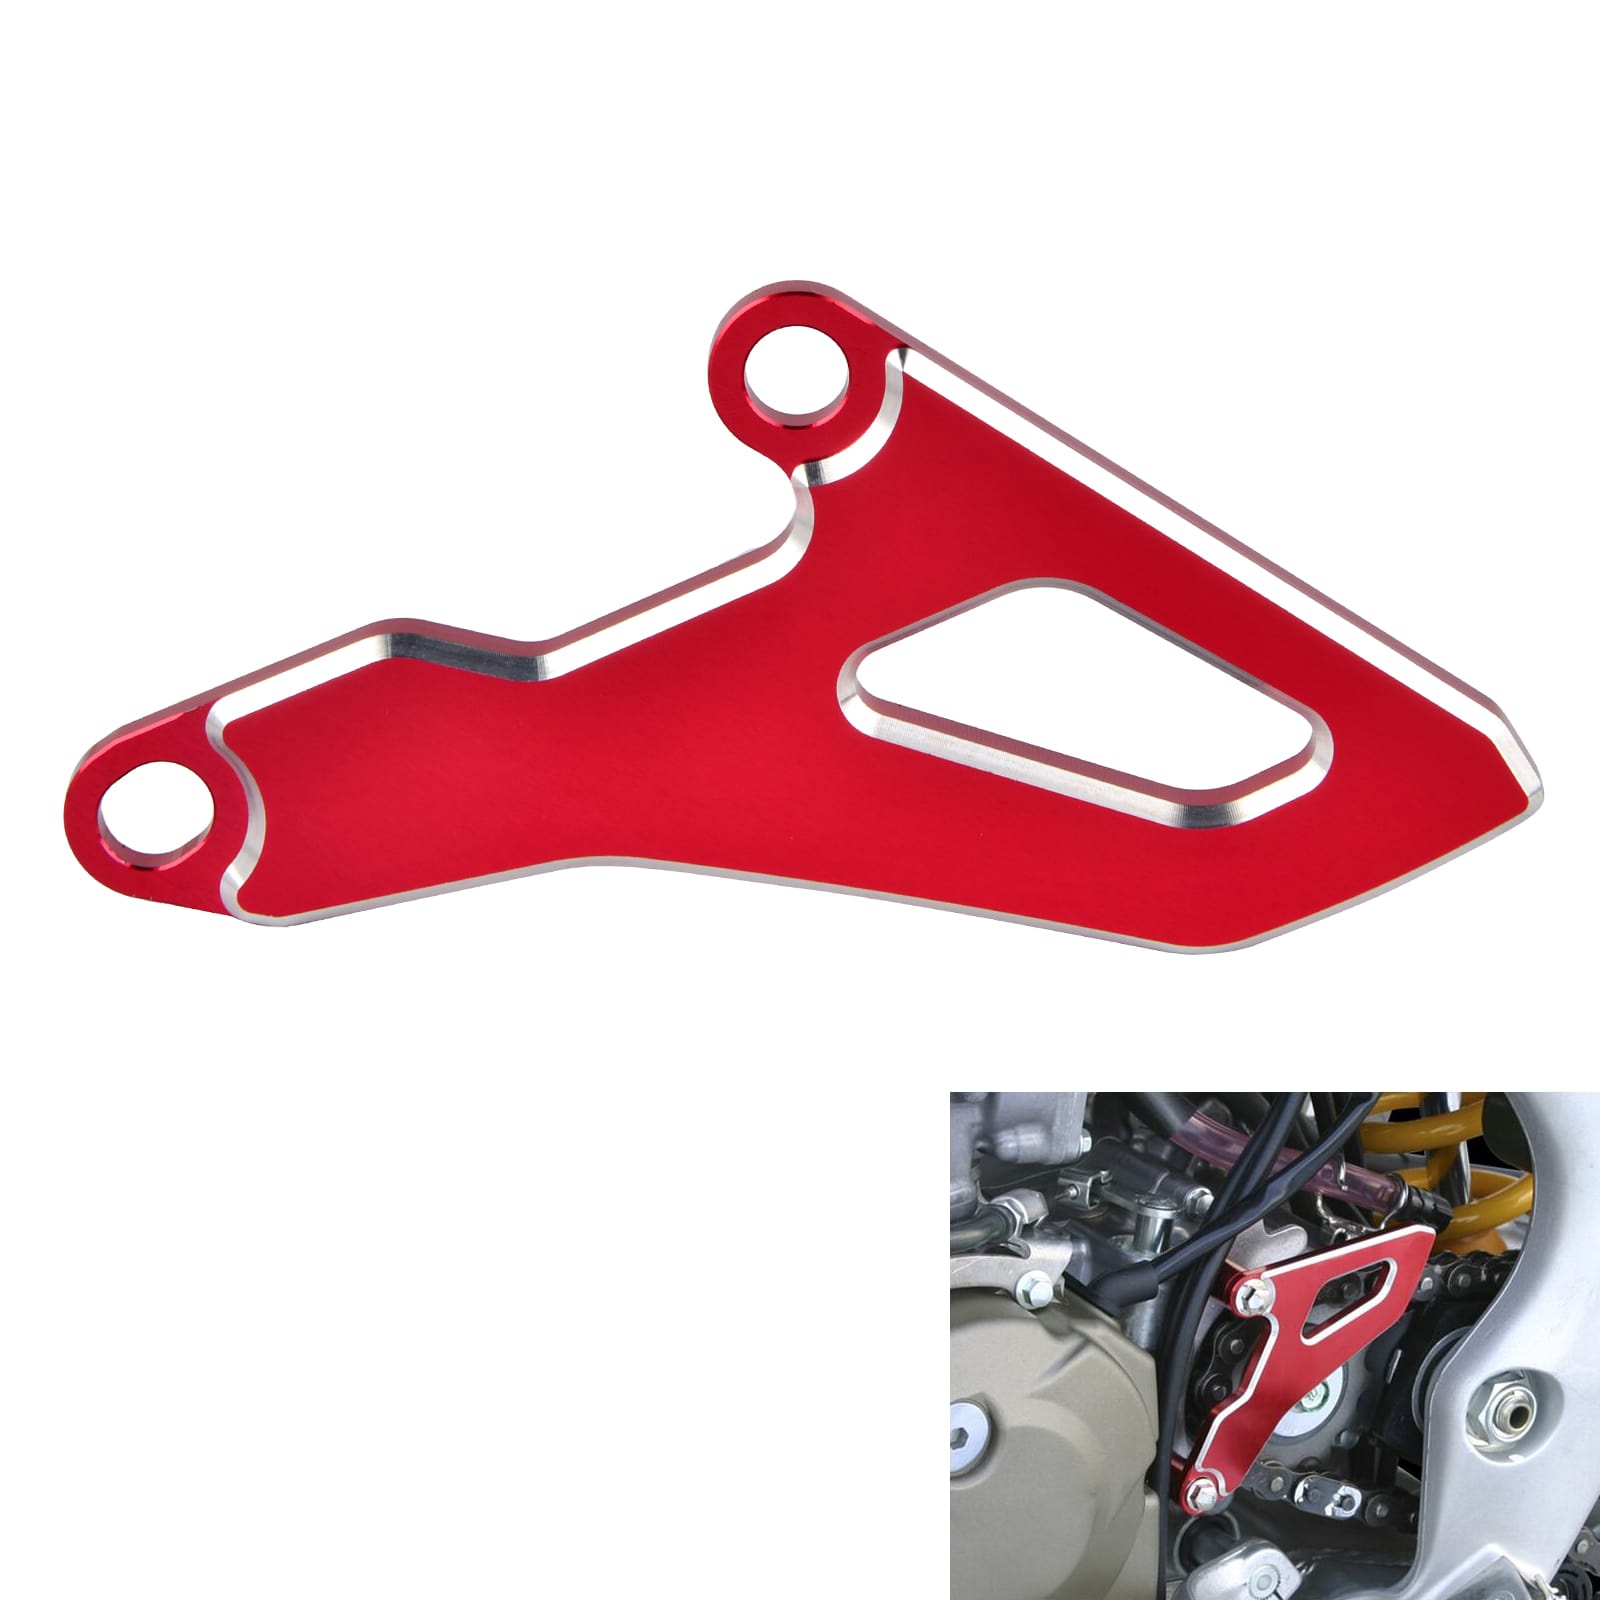 Billet Front Sprocket Cover Chain Guard for Honda and Yamaha